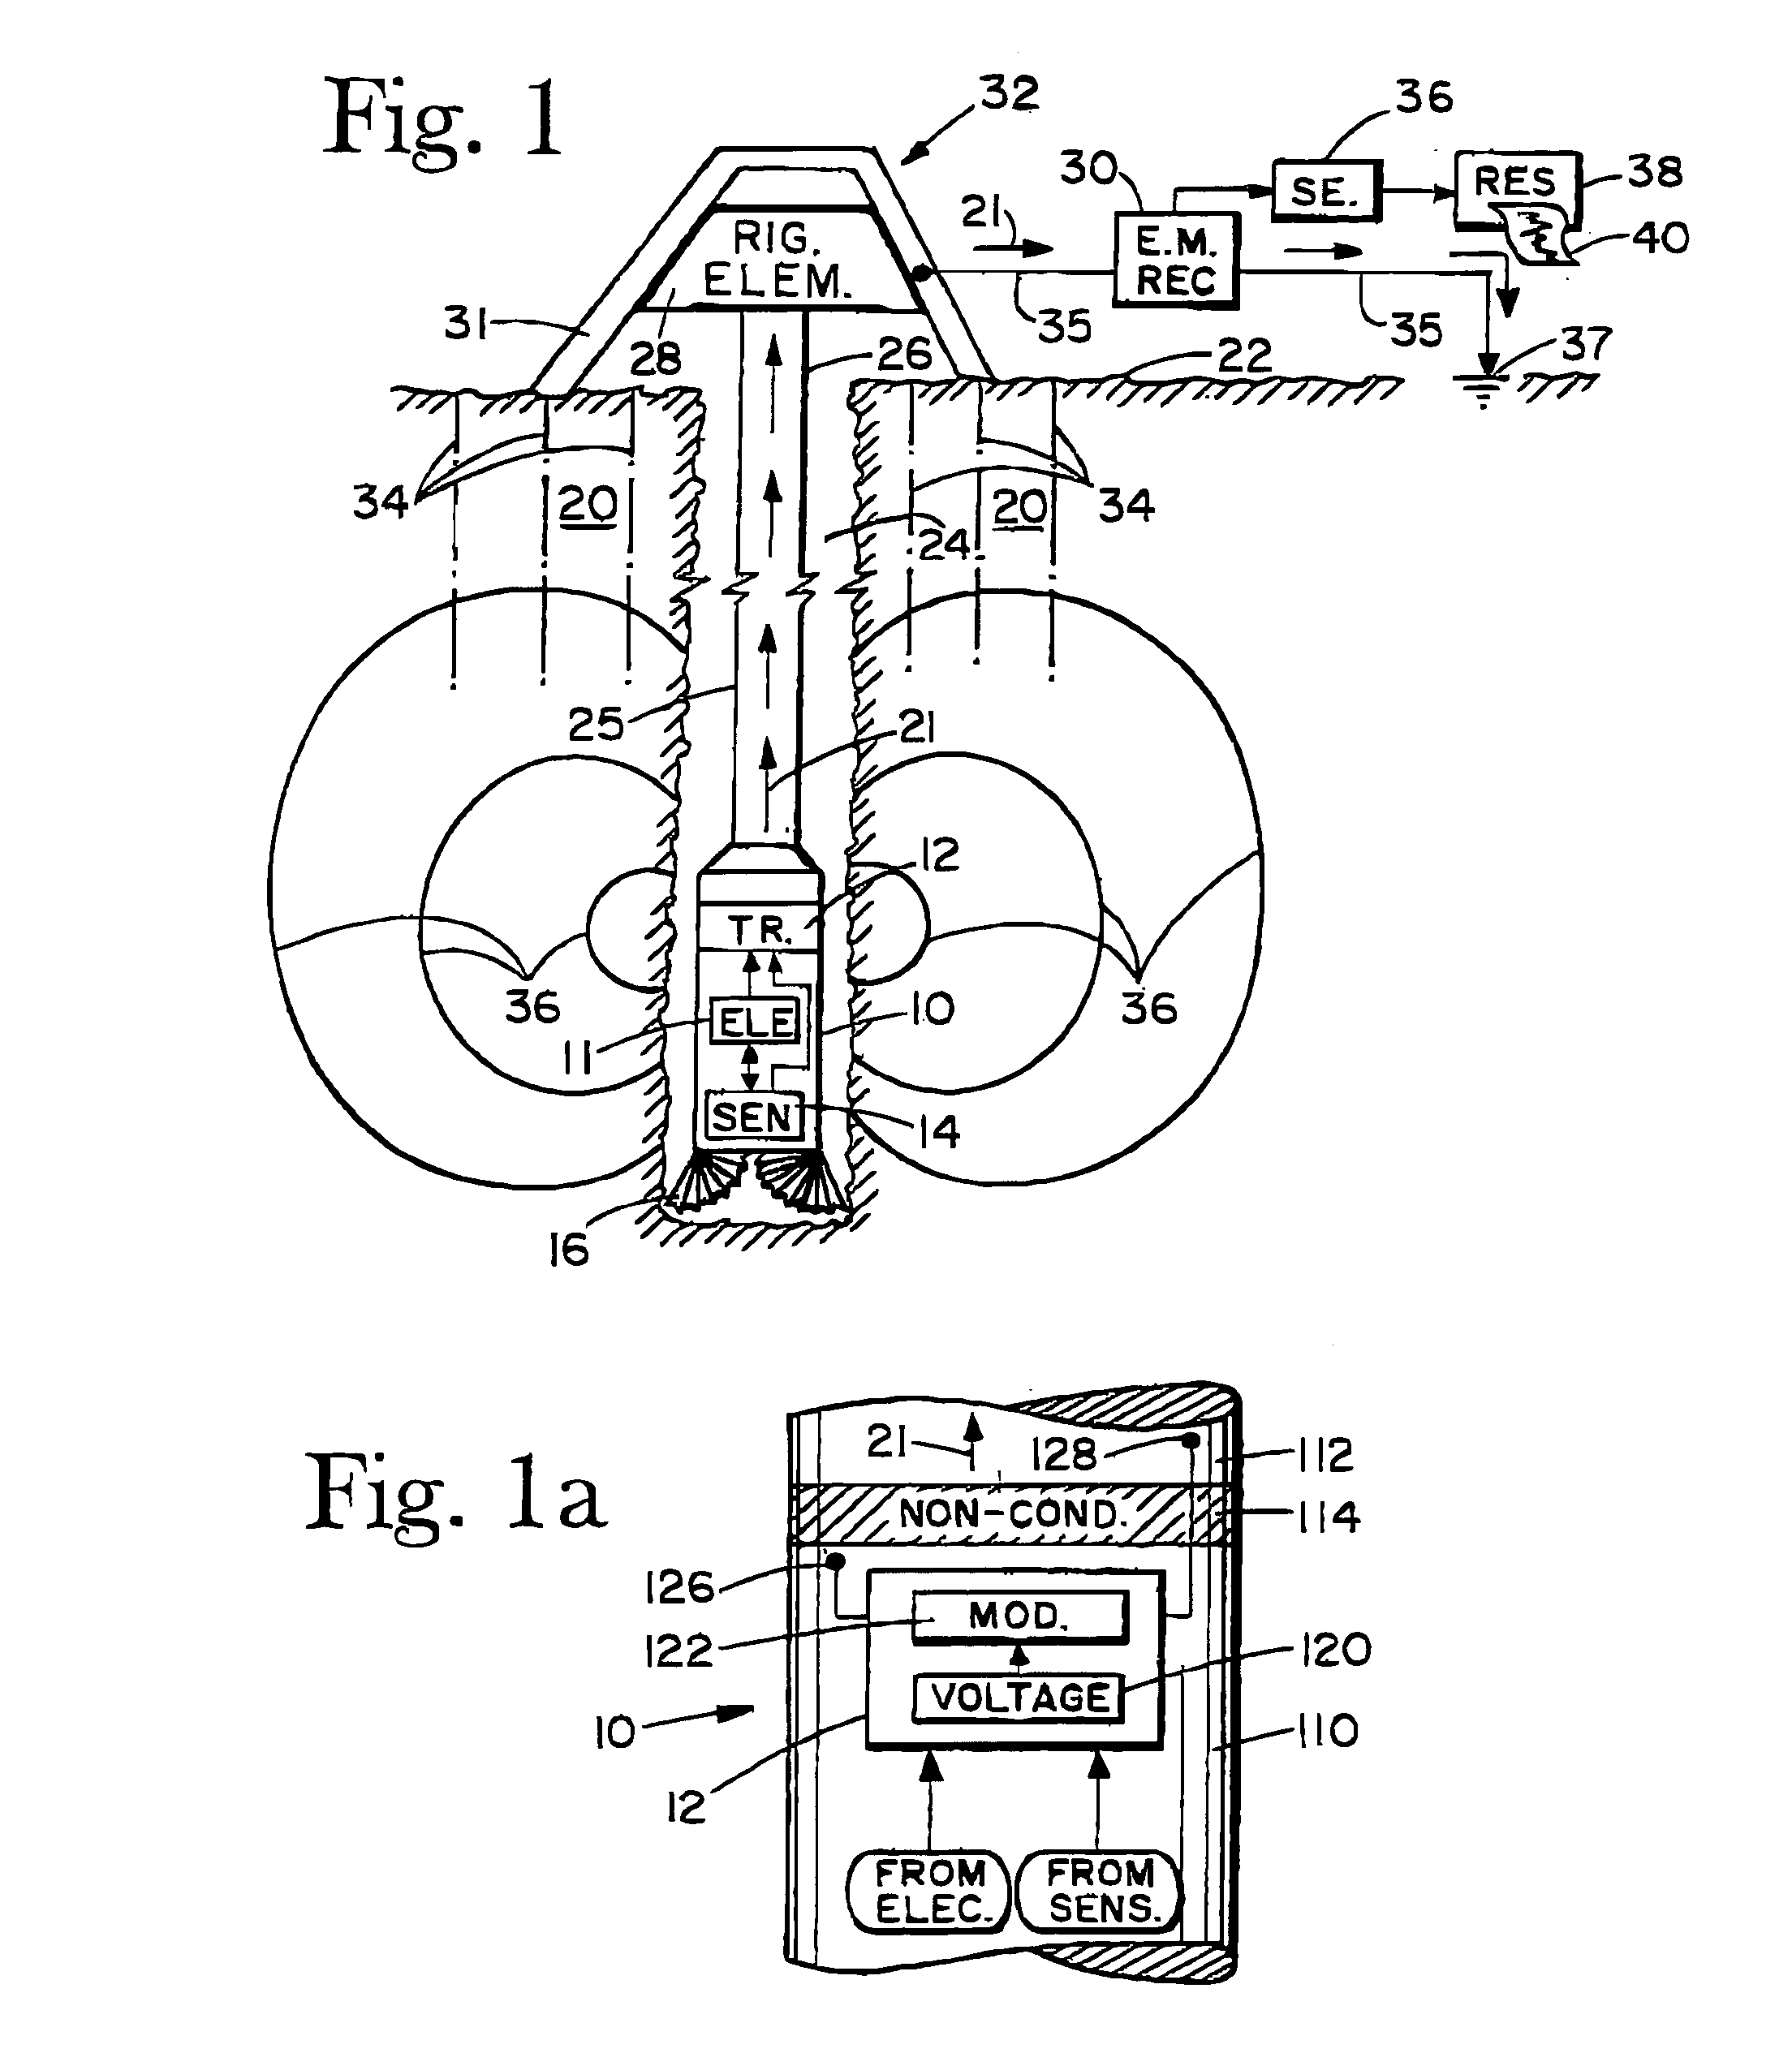 Electromagnetic MWD telemetry system incorporating a current sensing transformer